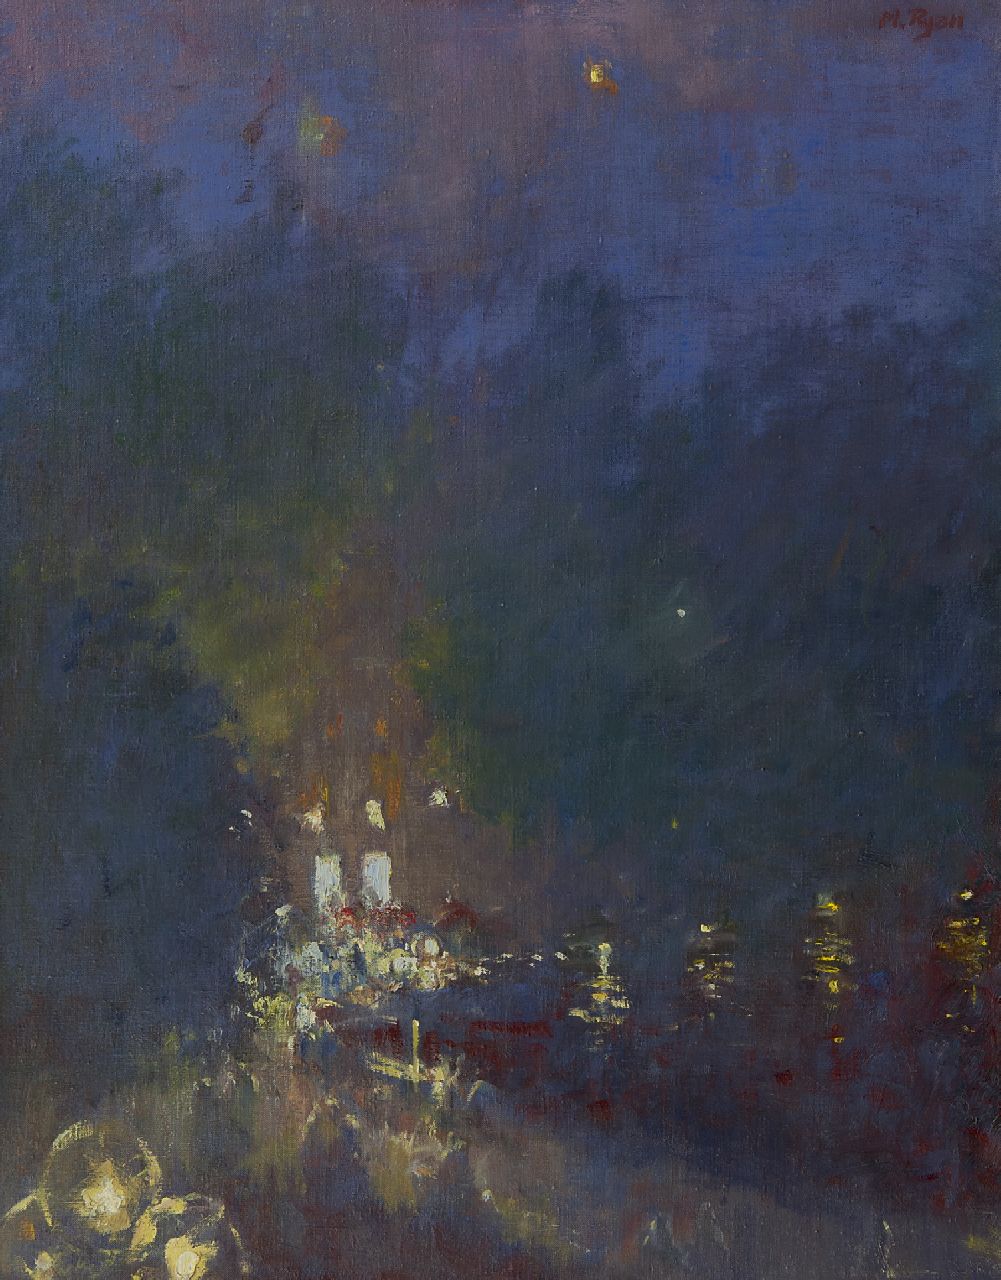 Ryan M.  | Michael Ryan | Paintings offered for sale | Twilight Leidseplein, Amsterdam, oil on canvas 90.0 x 70.2 cm, signed l.l. and painted 1984